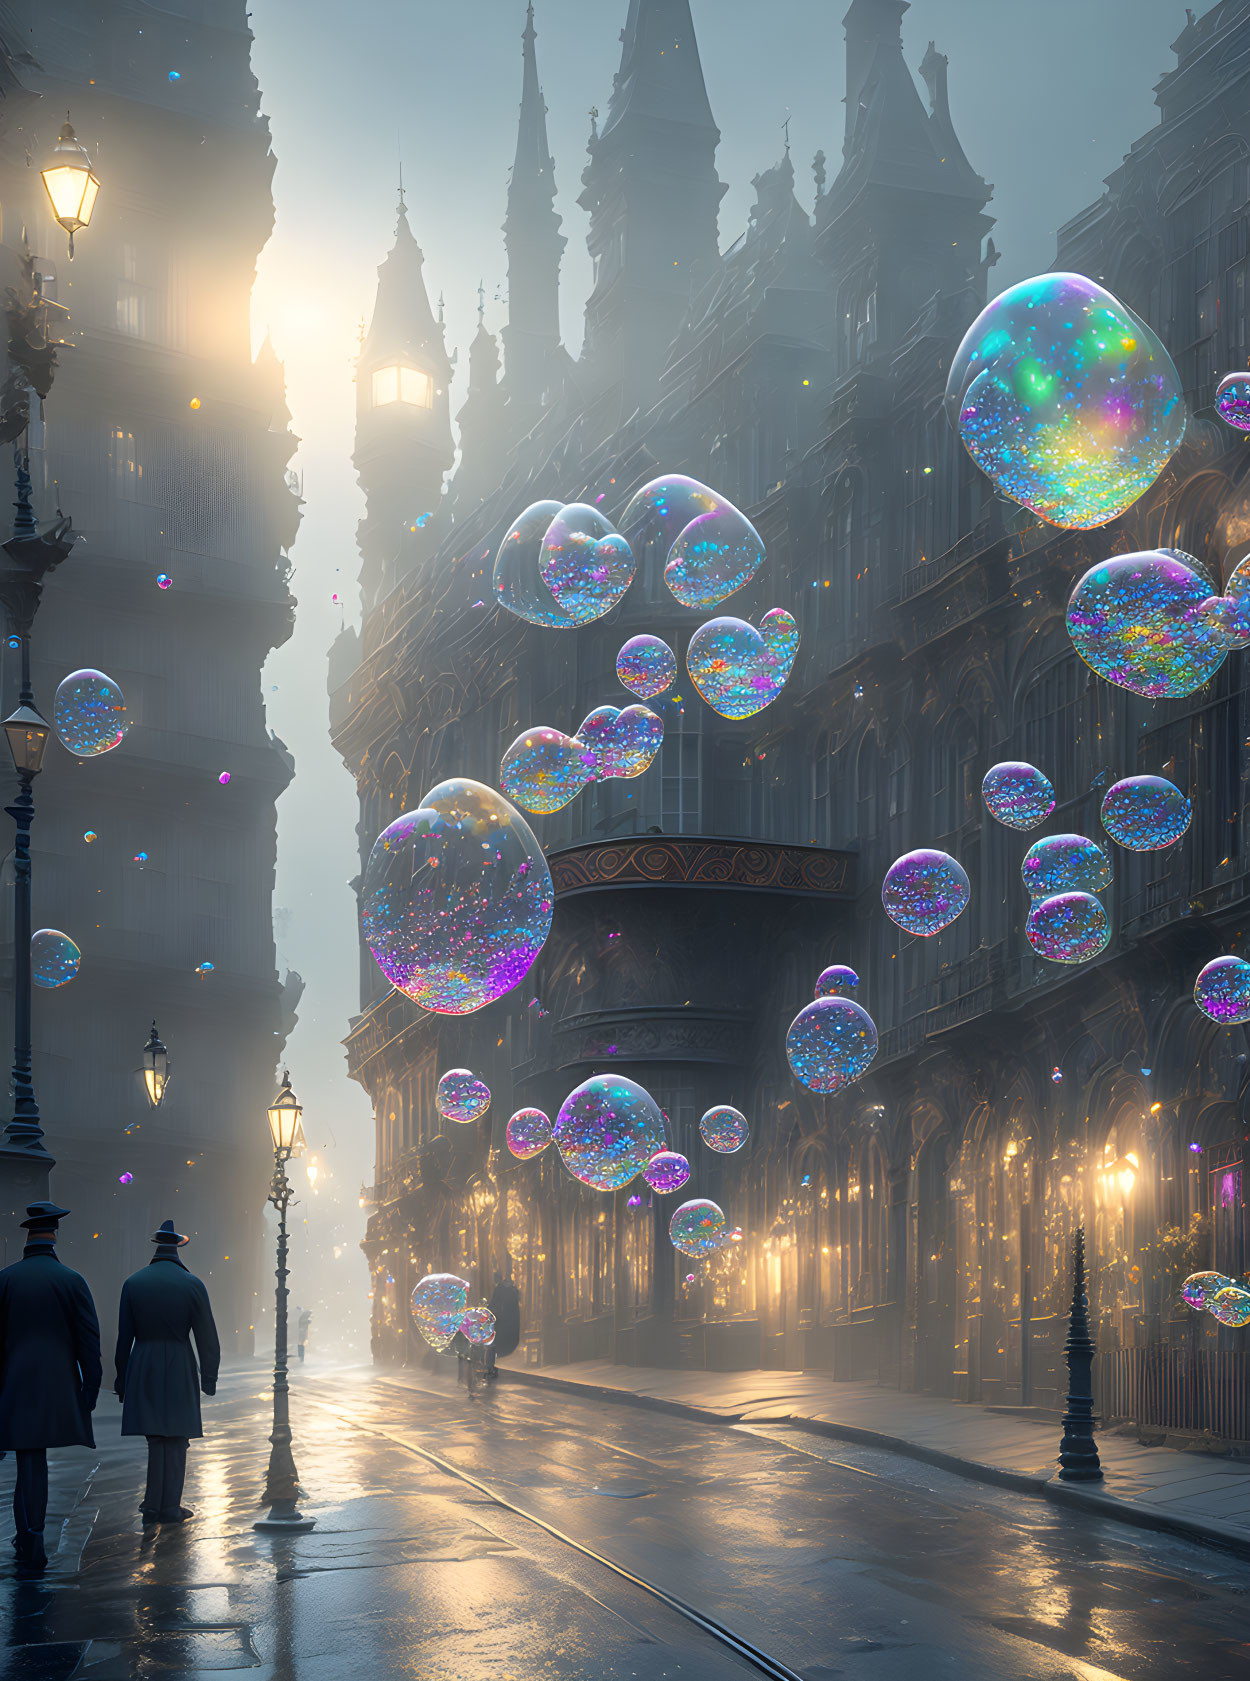 Misty city street scene with shimmering bubbles and silhouetted figures.